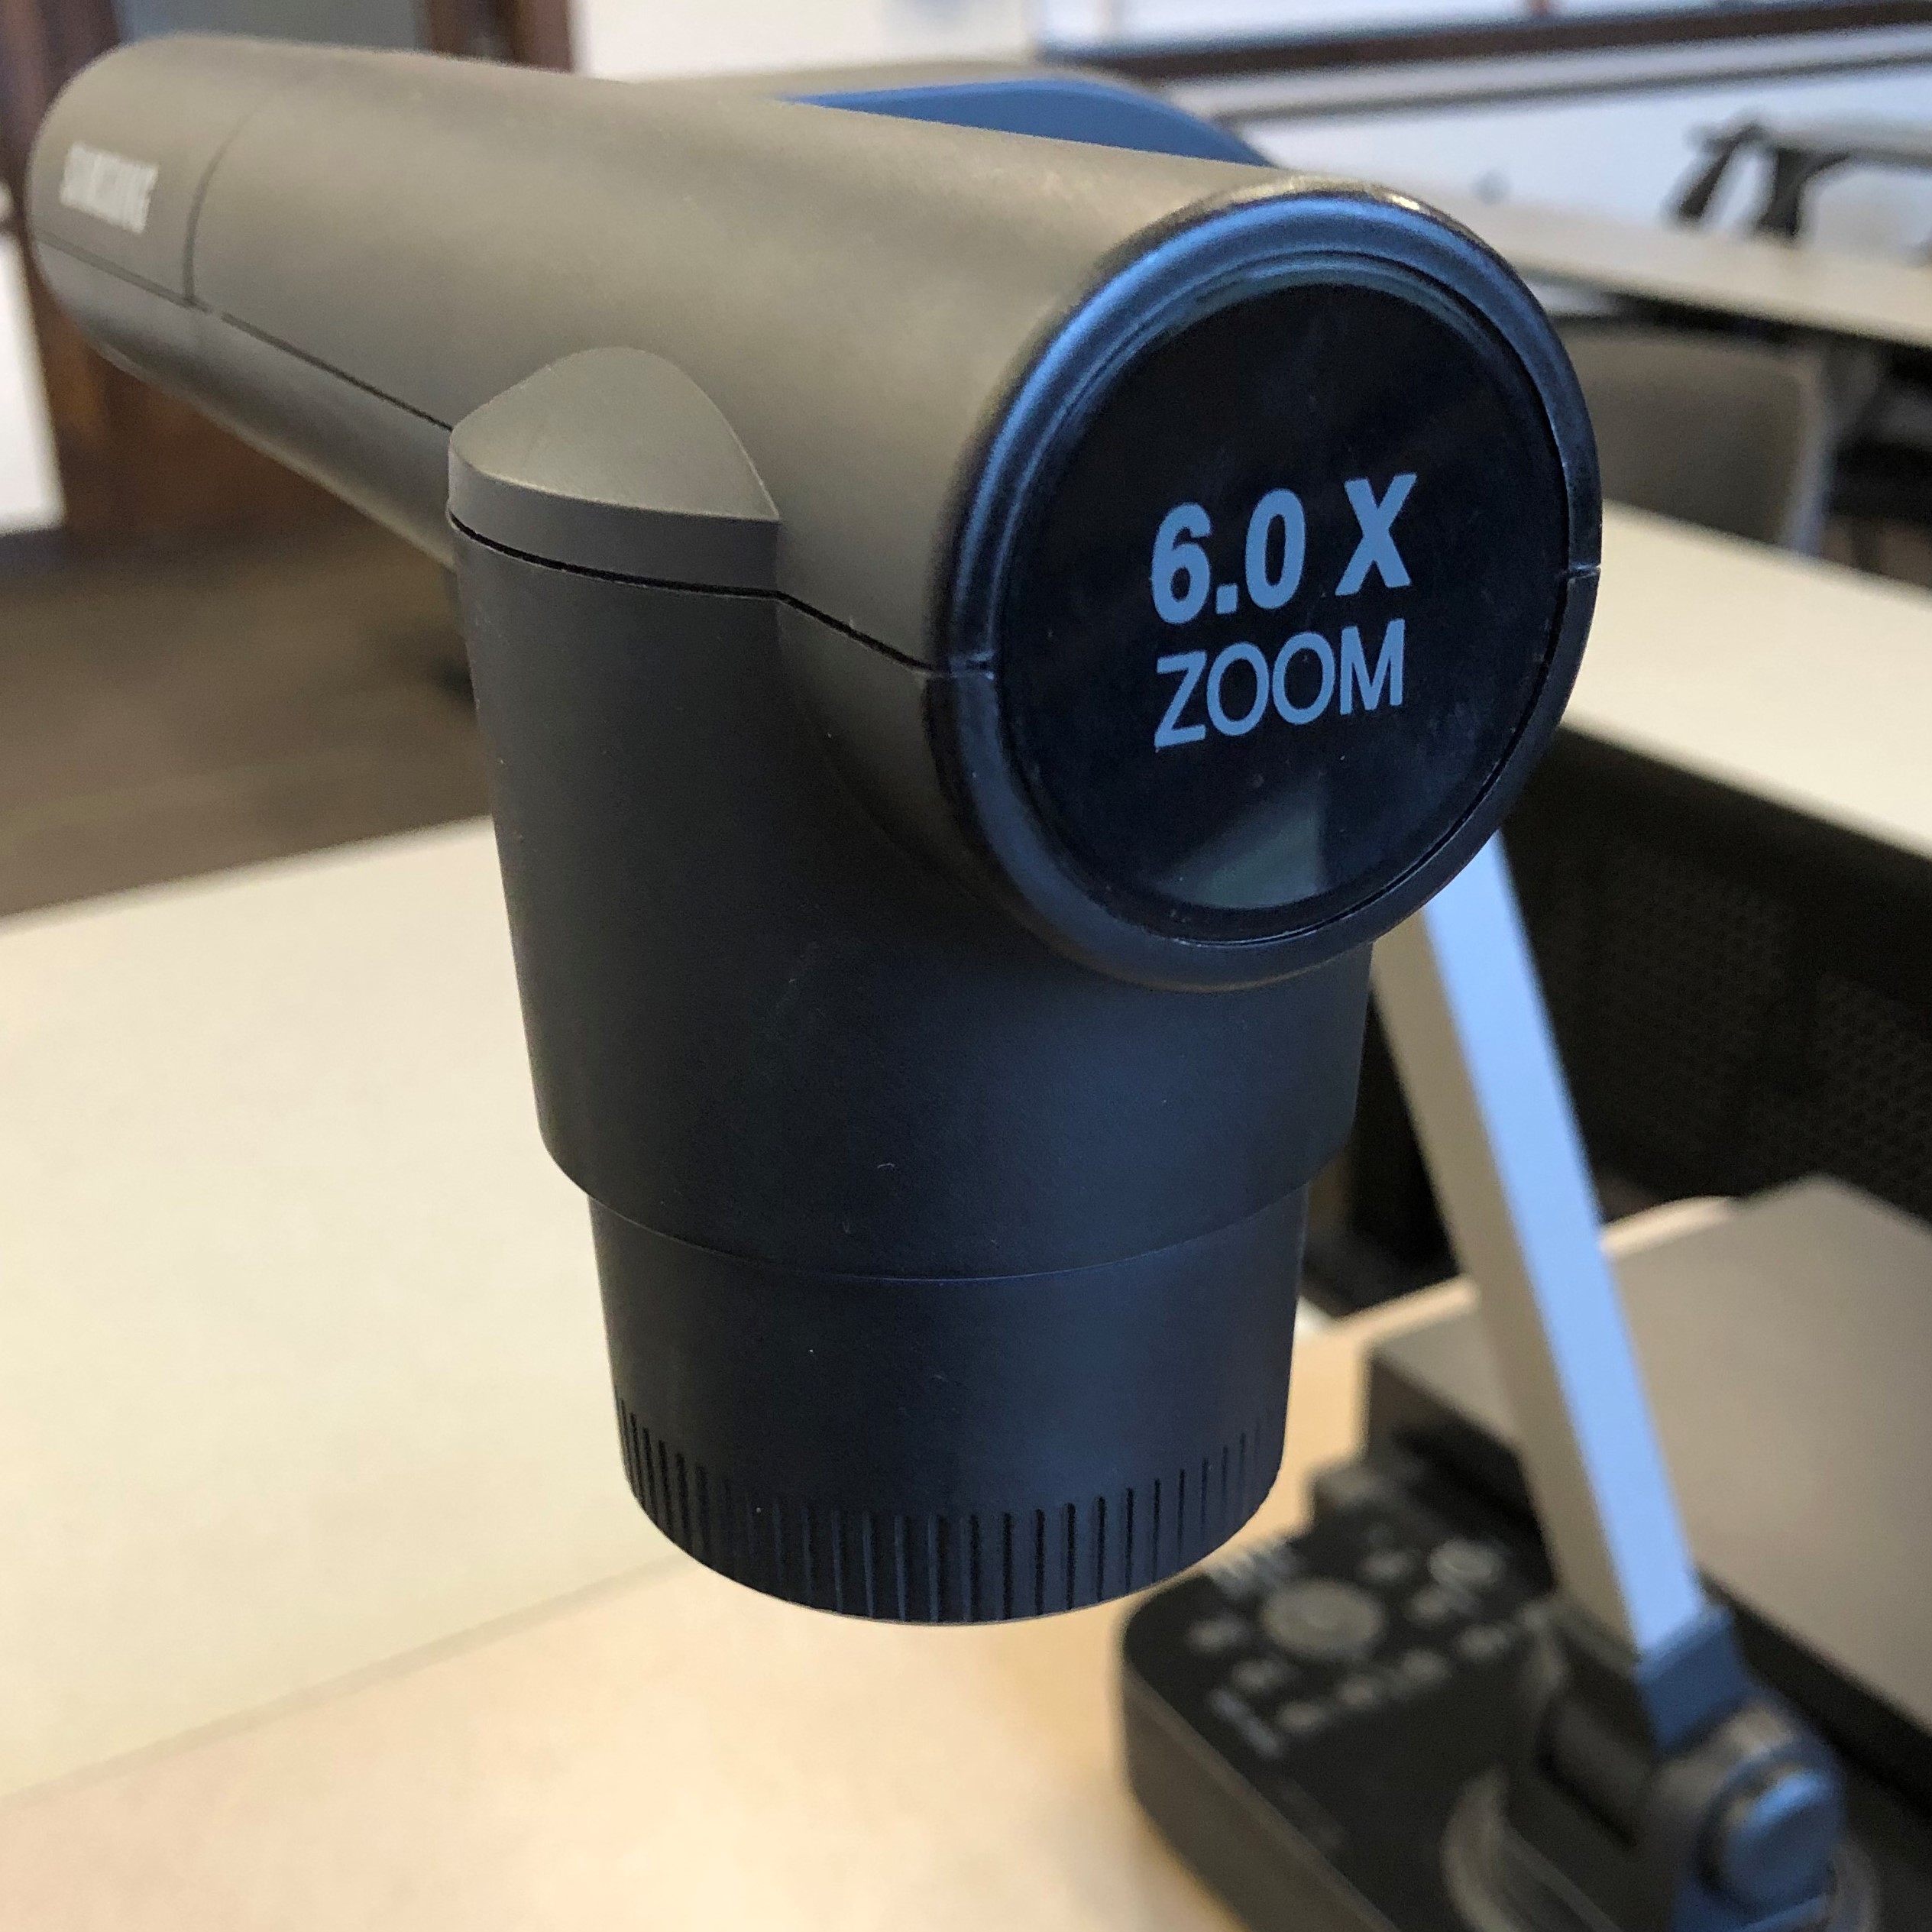 Samsung SDP-860 model document camera, zoomed in on camera arm